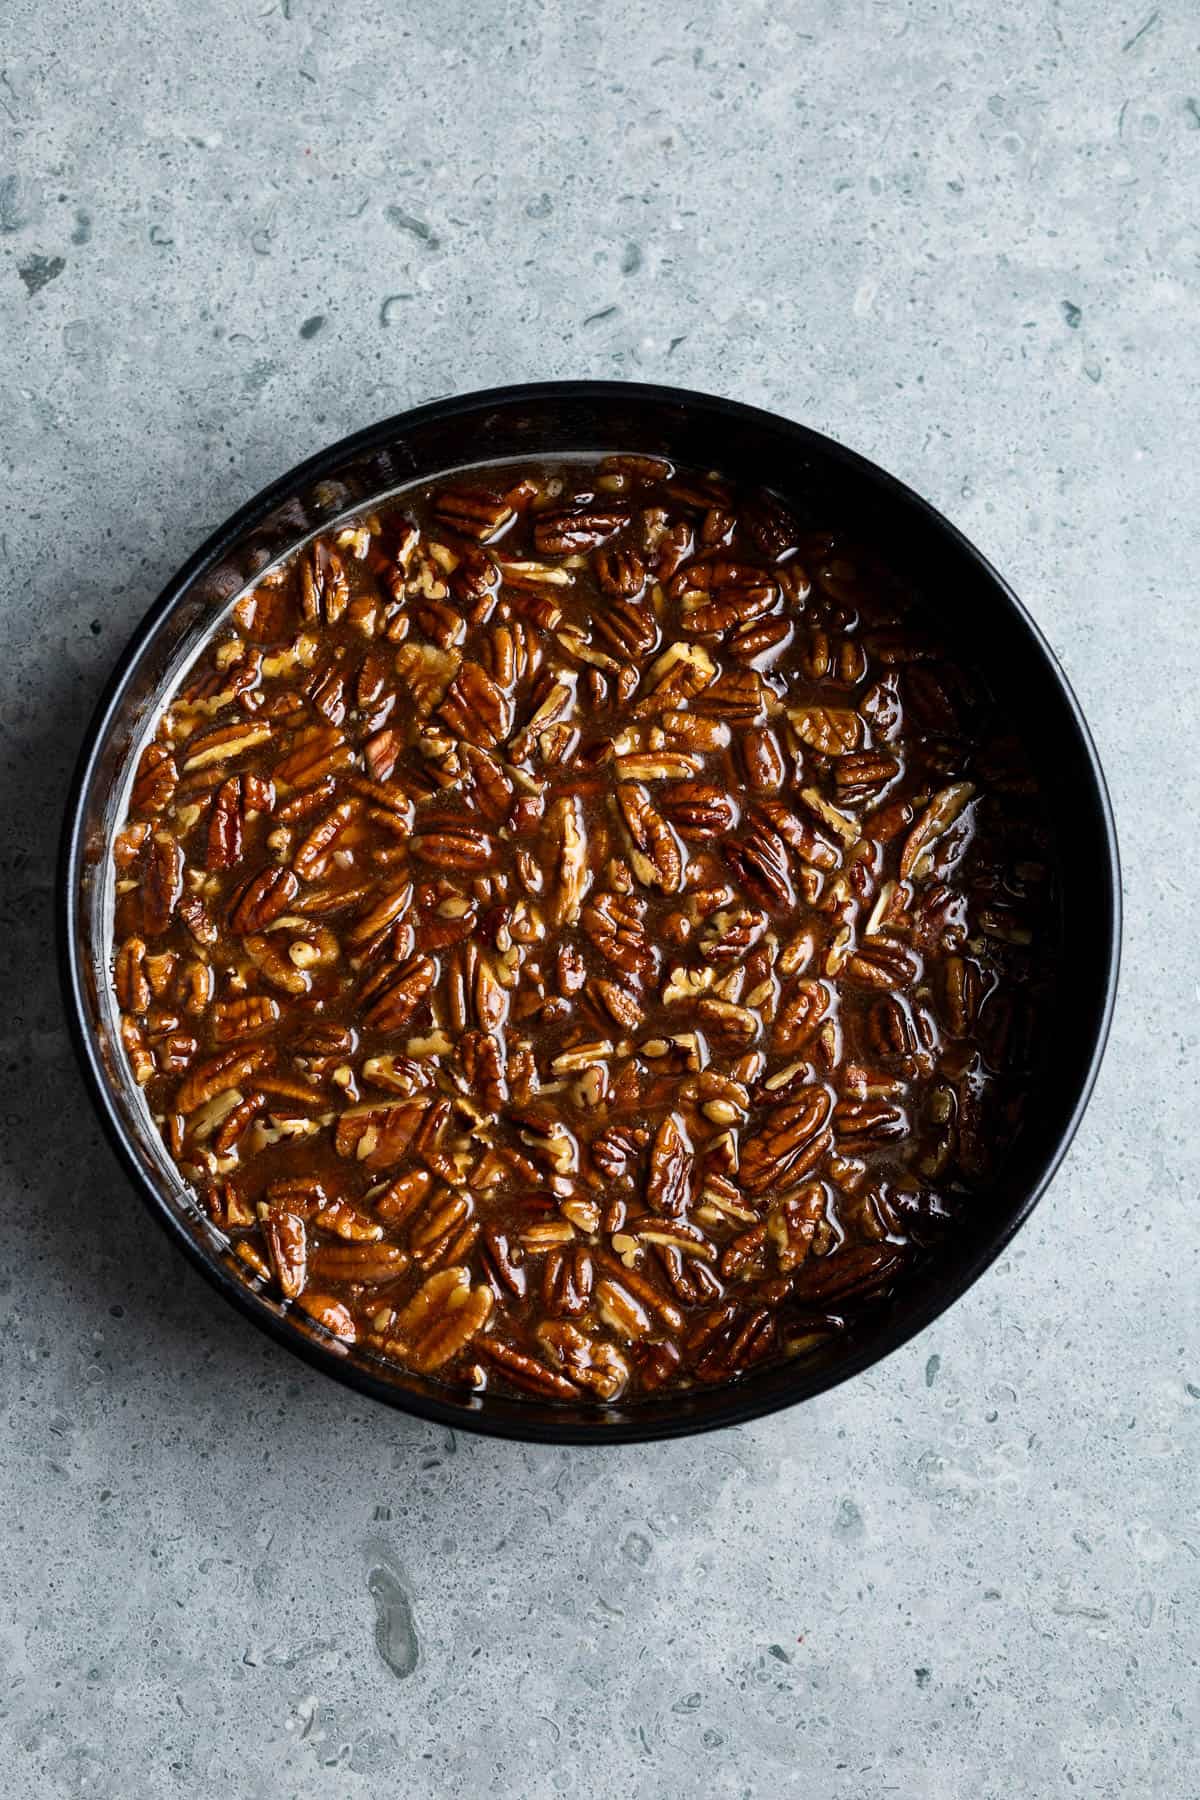 The pecan topping poured into the round cake pan.